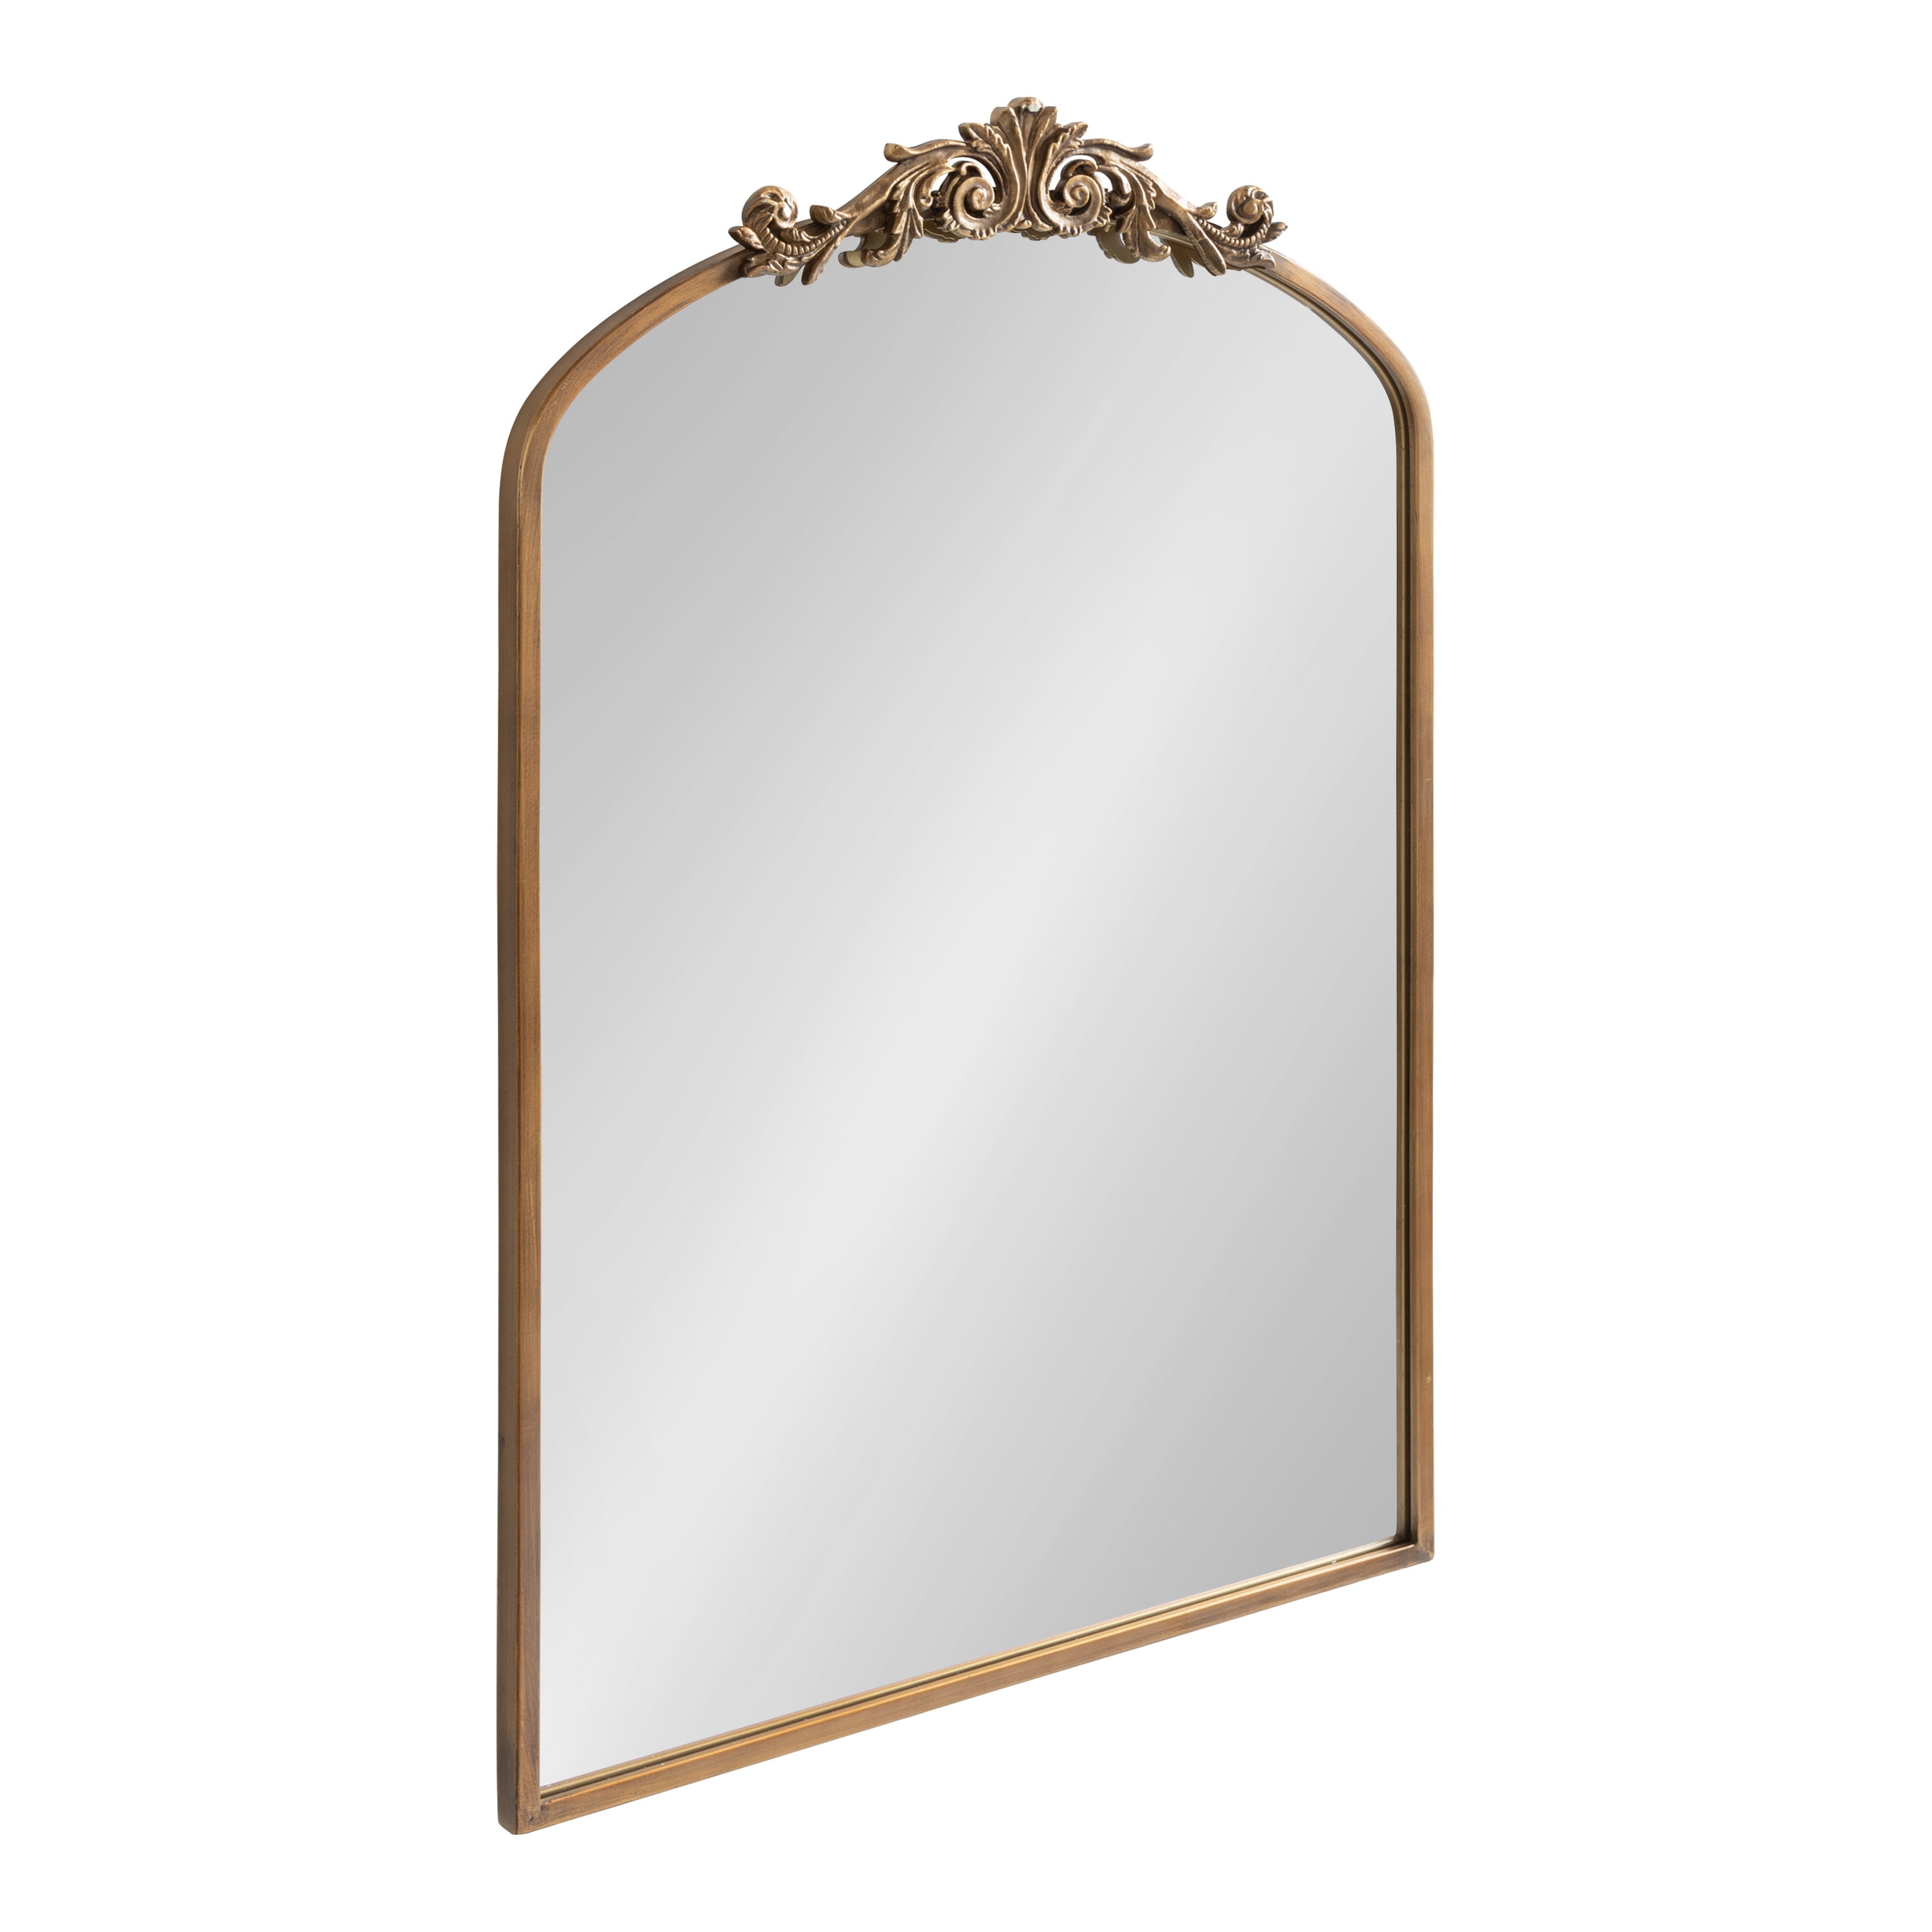 Laurel Arendahl Traditional Arch Mirror, Antique Gold Ornate Traditional Full Length Mirror